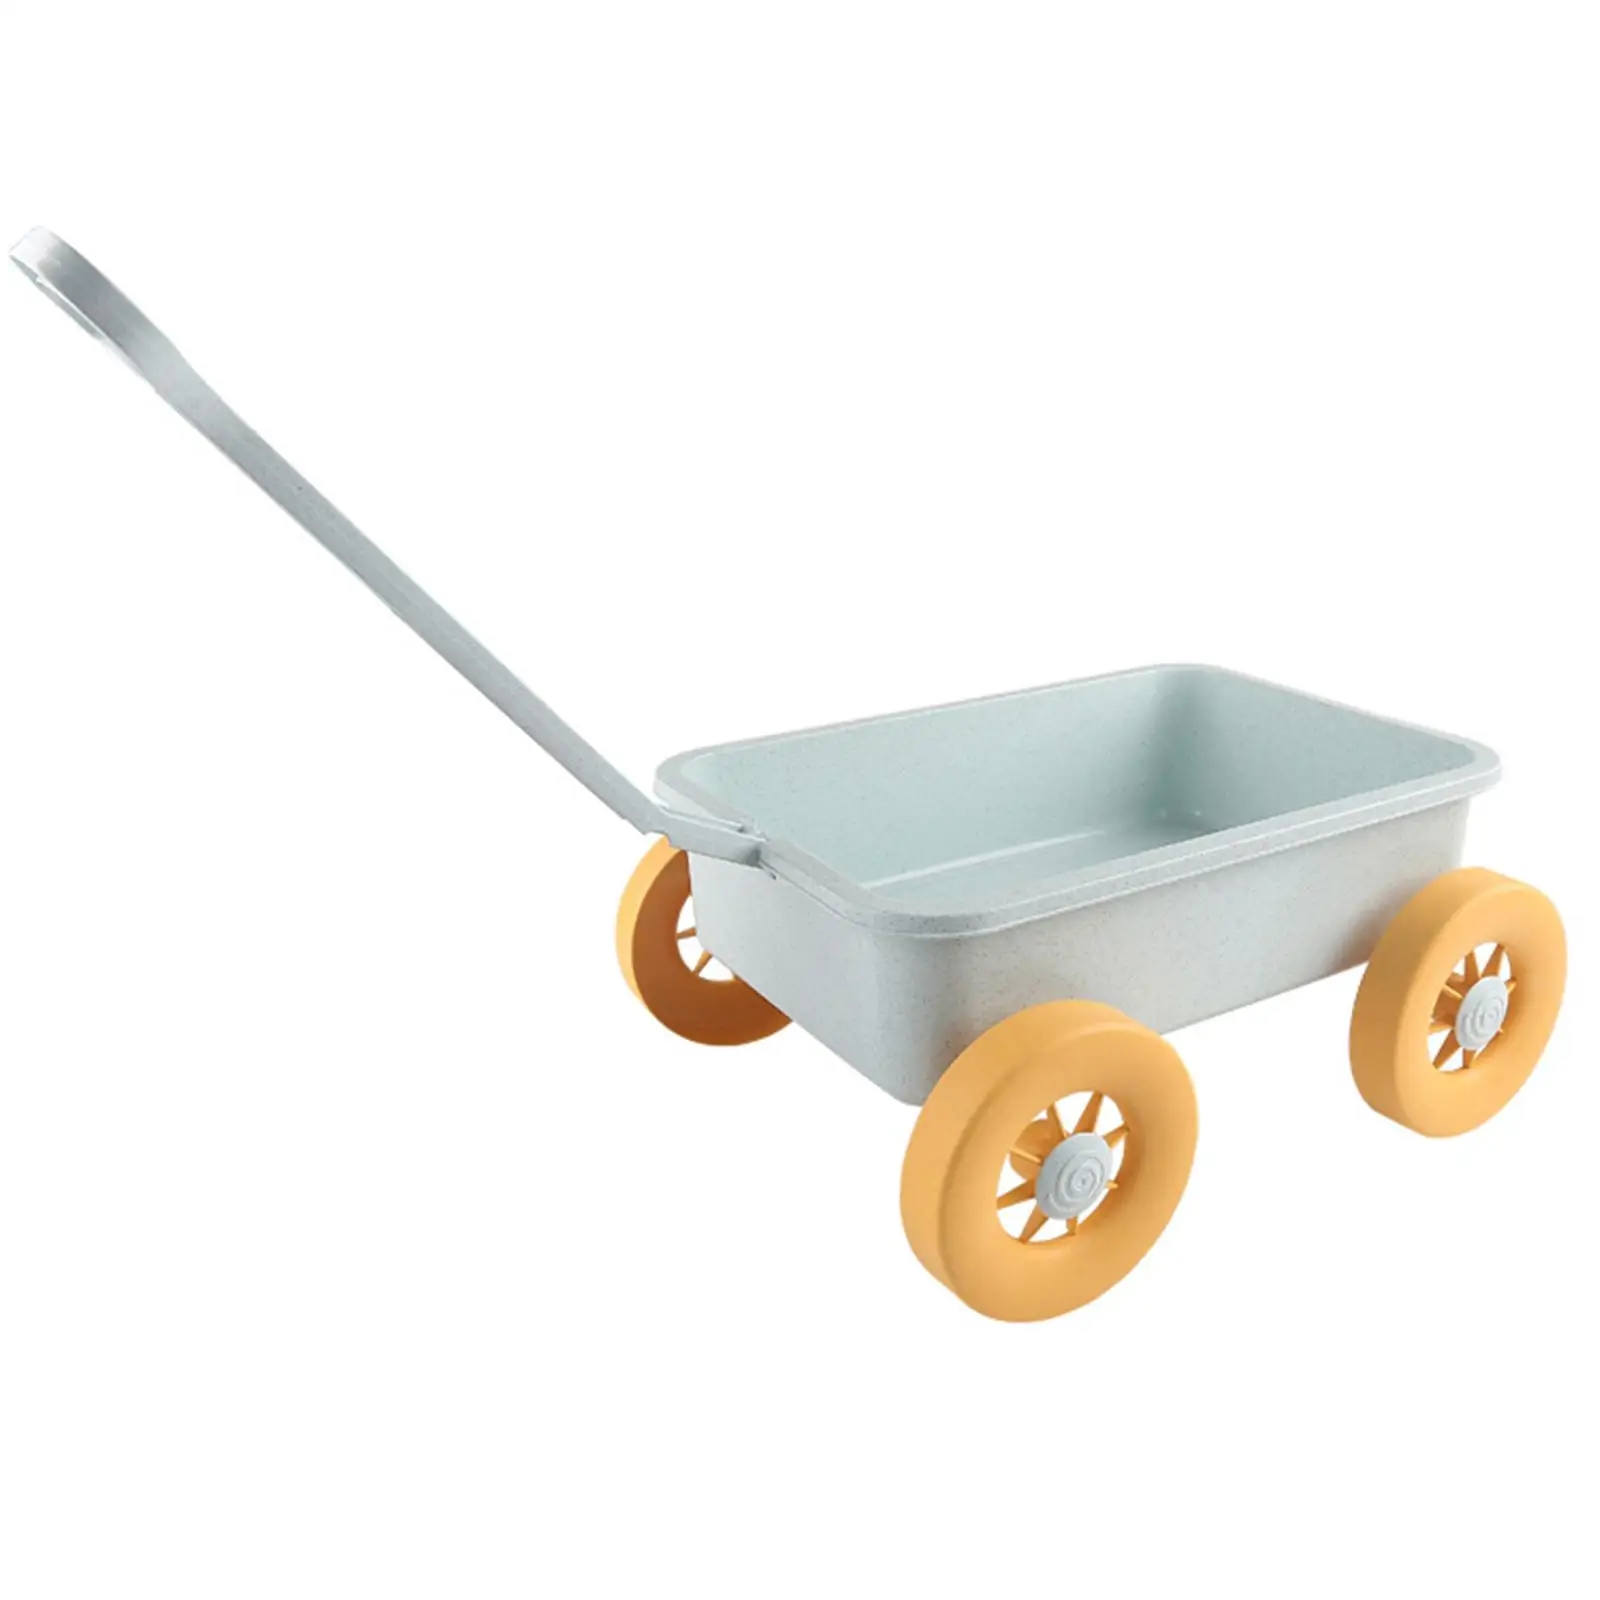 Small Wagon Toy Motor Vehicles Garden Wagon Tools Toy for Holding Small Toys